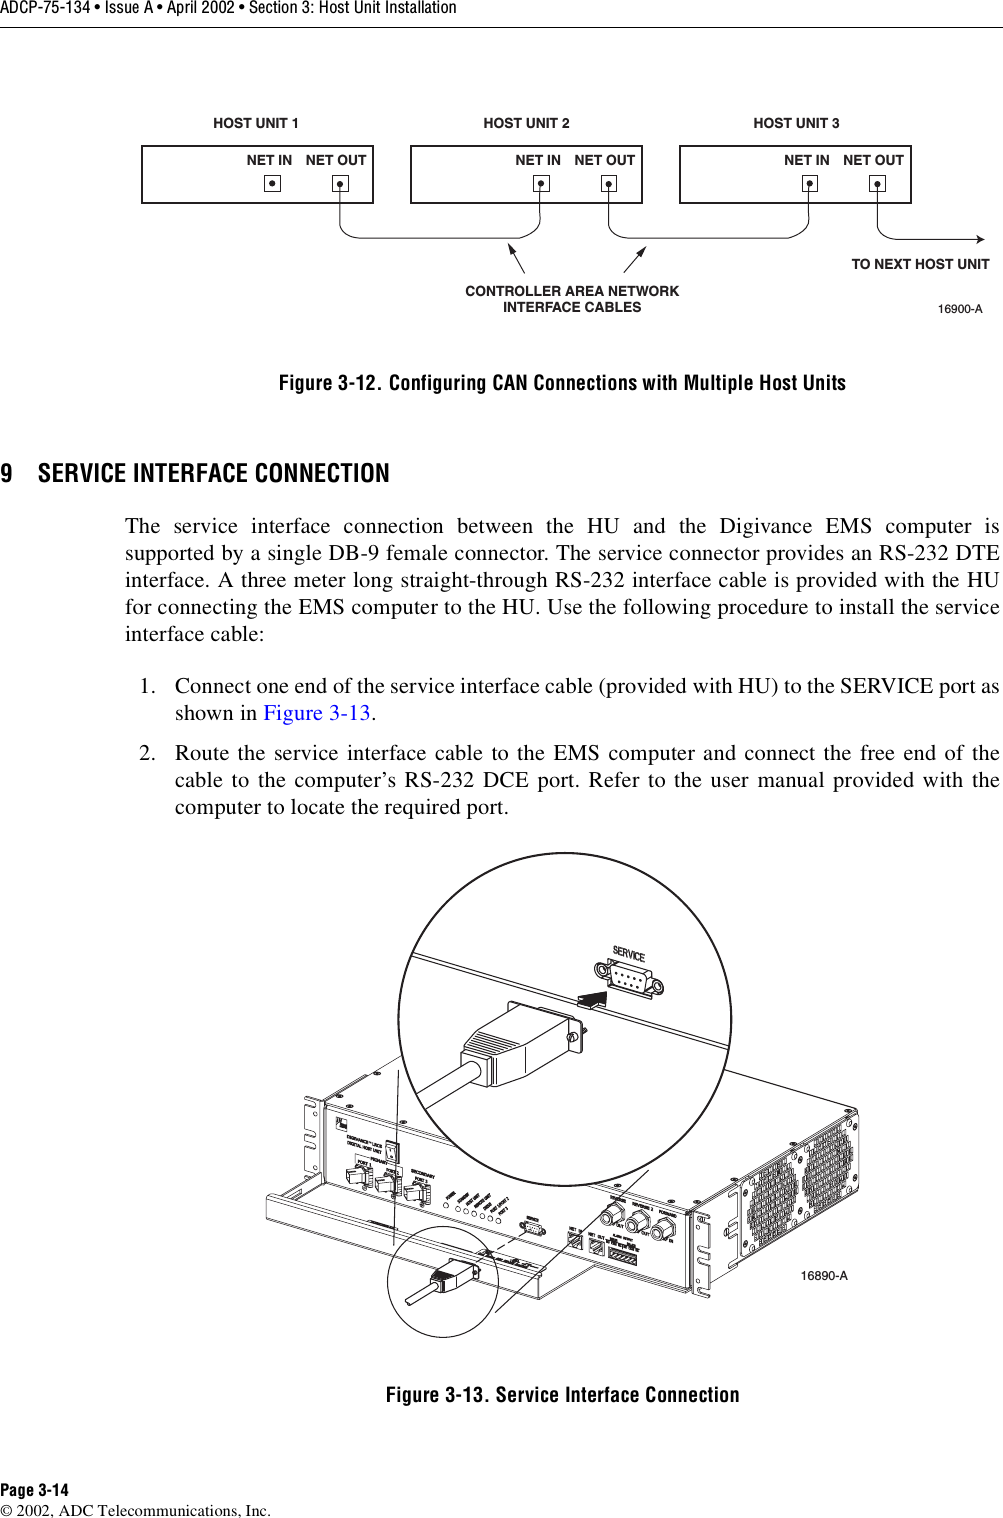 ADCP-75-134 • Issue A • April 2002 • Section 3: Host Unit InstallationPage 3-14©2002, ADC Telecommunications, Inc.Figure 3-12. Configuring CAN Connections with Multiple Host Units9 SERVICE INTERFACE CONNECTIONThe service interface connection between the HU and the Digivance EMS computer issupported by asingle DB-9 female connector. The service connector provides an RS-232 DTEinterface. Athree meter long straight-through RS-232 interface cable is provided with the HUfor connecting the EMS computer to the HU. Use the following procedure to install the serviceinterface cable:1. Connect one end of the service interface cable (provided with HU) to the SERVICE port asshown in Figure 3-13.2. Route the service interface cable to the EMS computer and connect the free end of thecable to the computer’s RS-232 DCE port. Refer to the user manual provided with thecomputer to locate the required port.Figure 3-13. Service Interface ConnectionHOST UNIT 1 HOST UNIT 2 HOST UNIT 3NET IN NET OUT NET IN NET OUT NET IN NET OUT16900-ACONTROLLER AREA NETWORKINTERFACE CABLESTO NEXT HOST UNIT16890-A